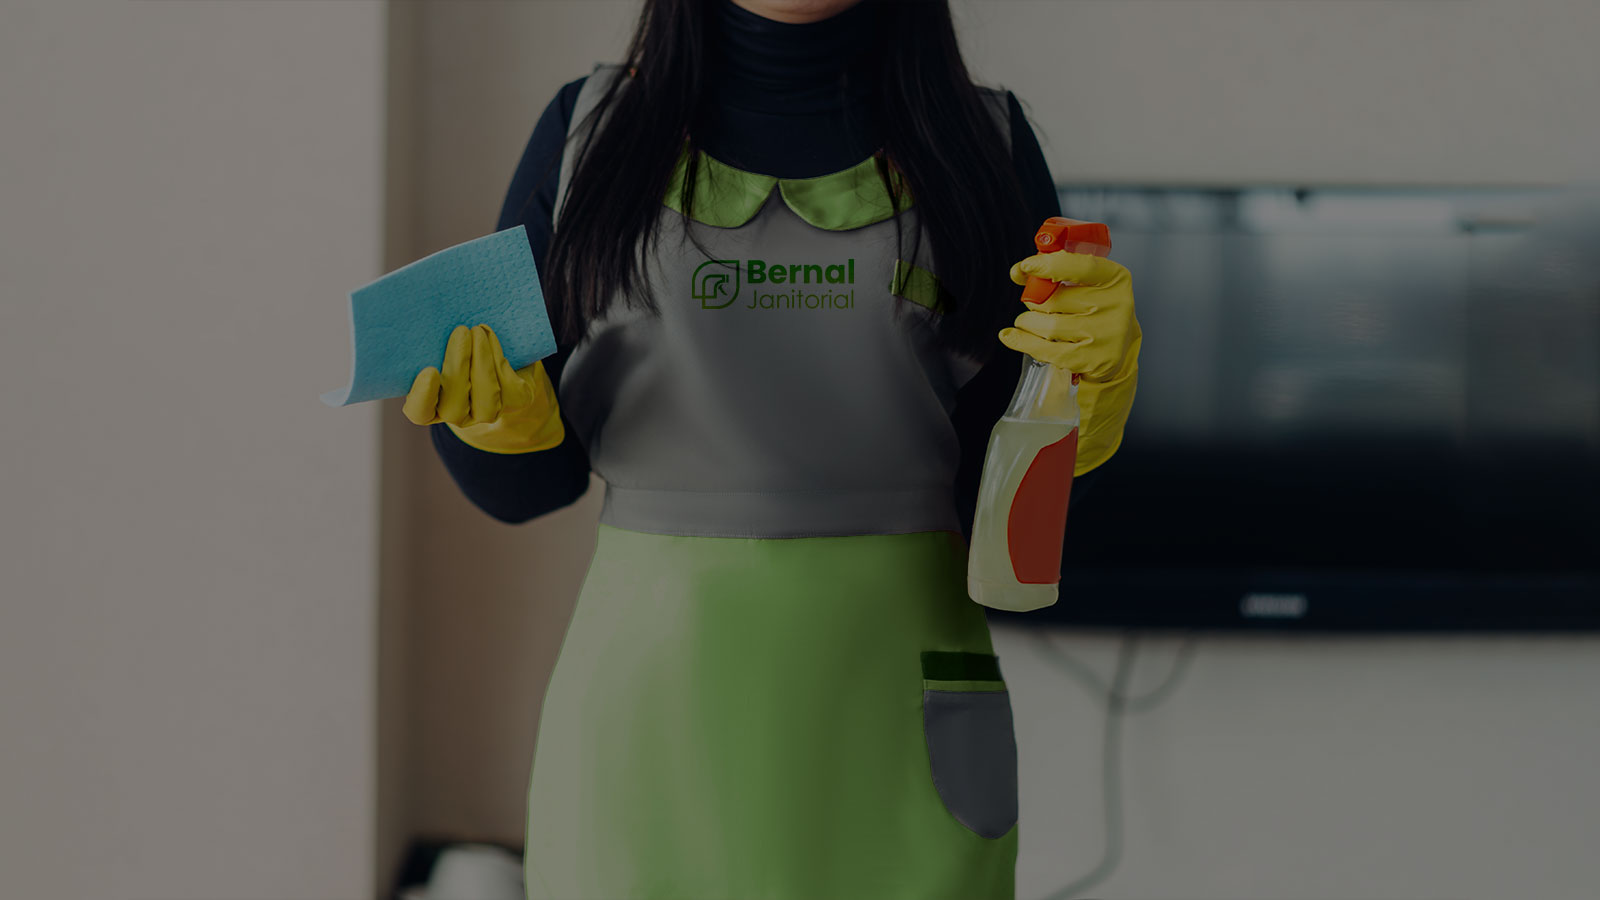 Cleaning services in denver metro area